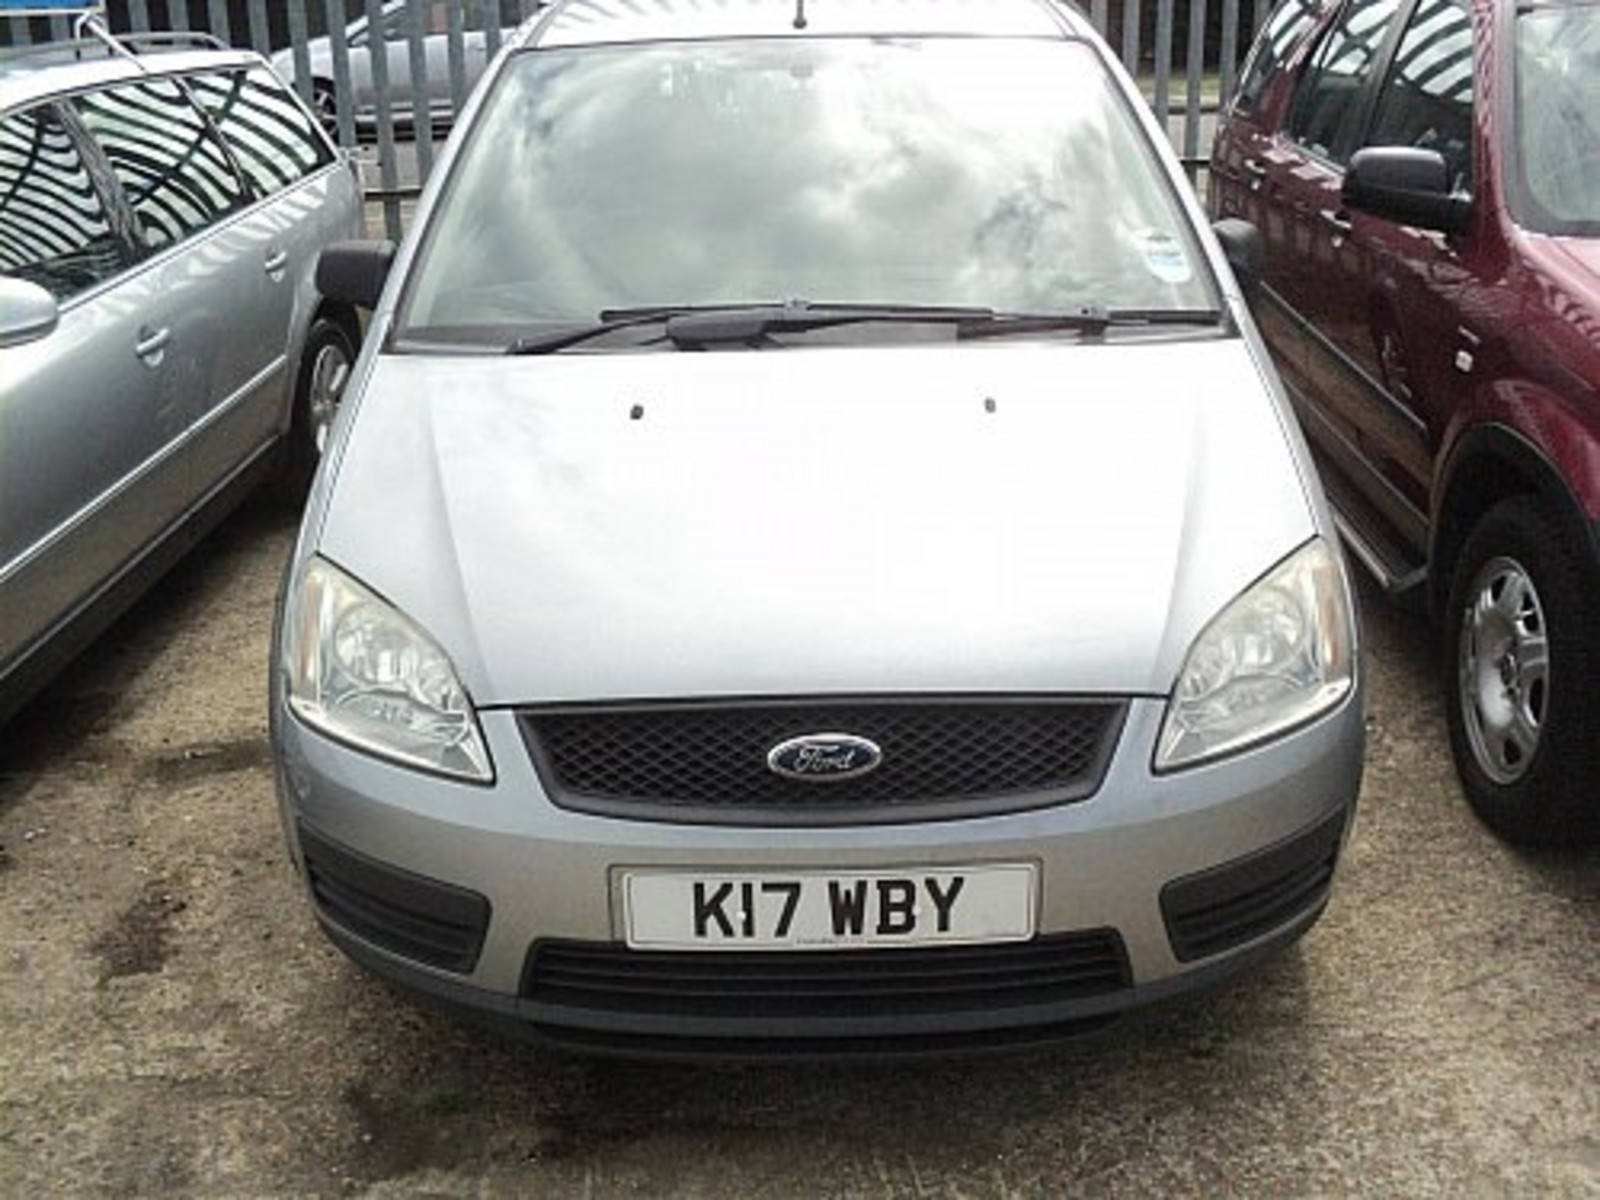 Secondhand ford focus parts #9